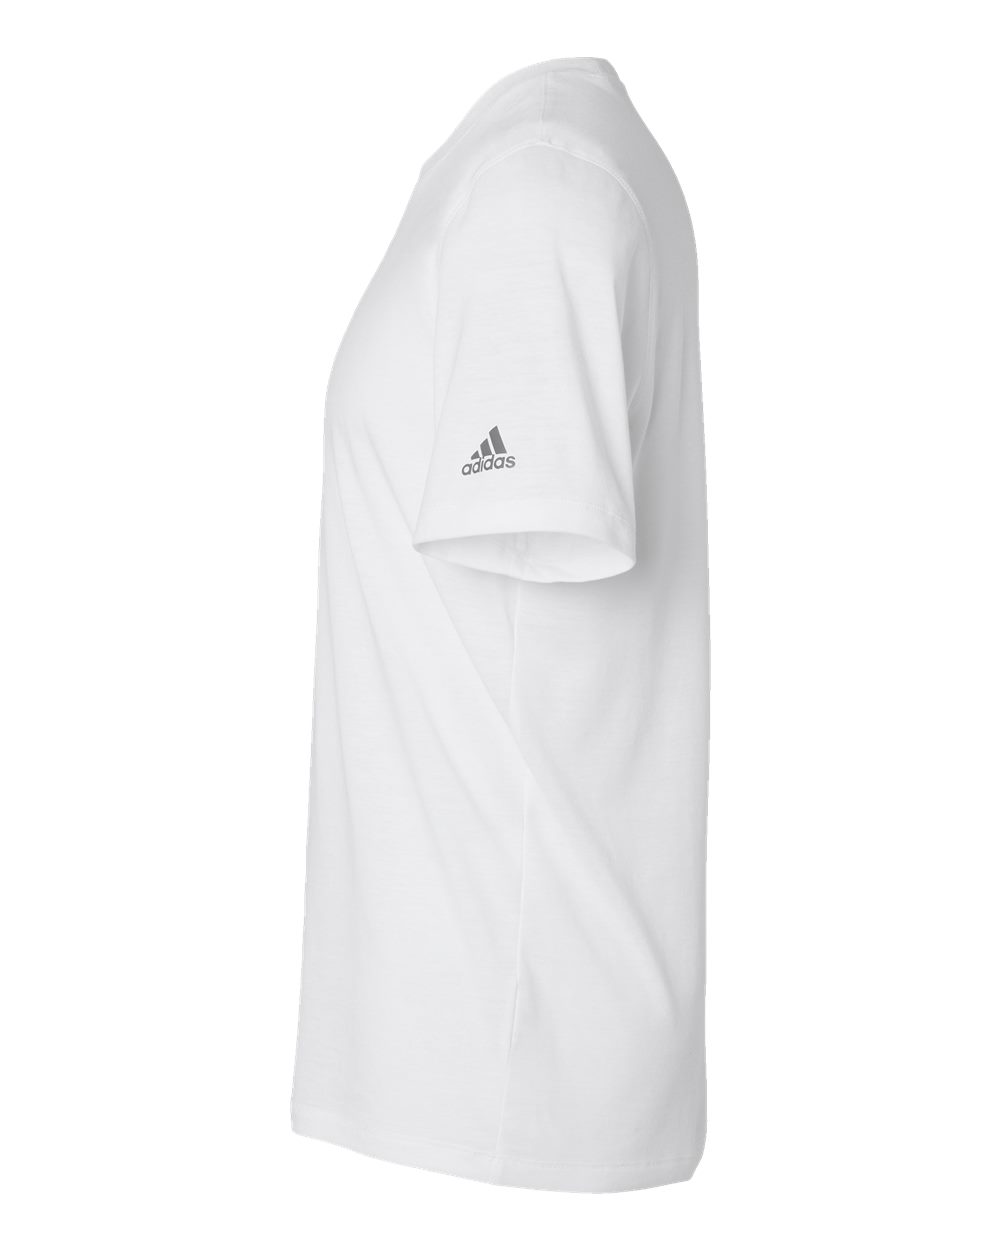 Adidas A556 Blended T-Shirt #color_White